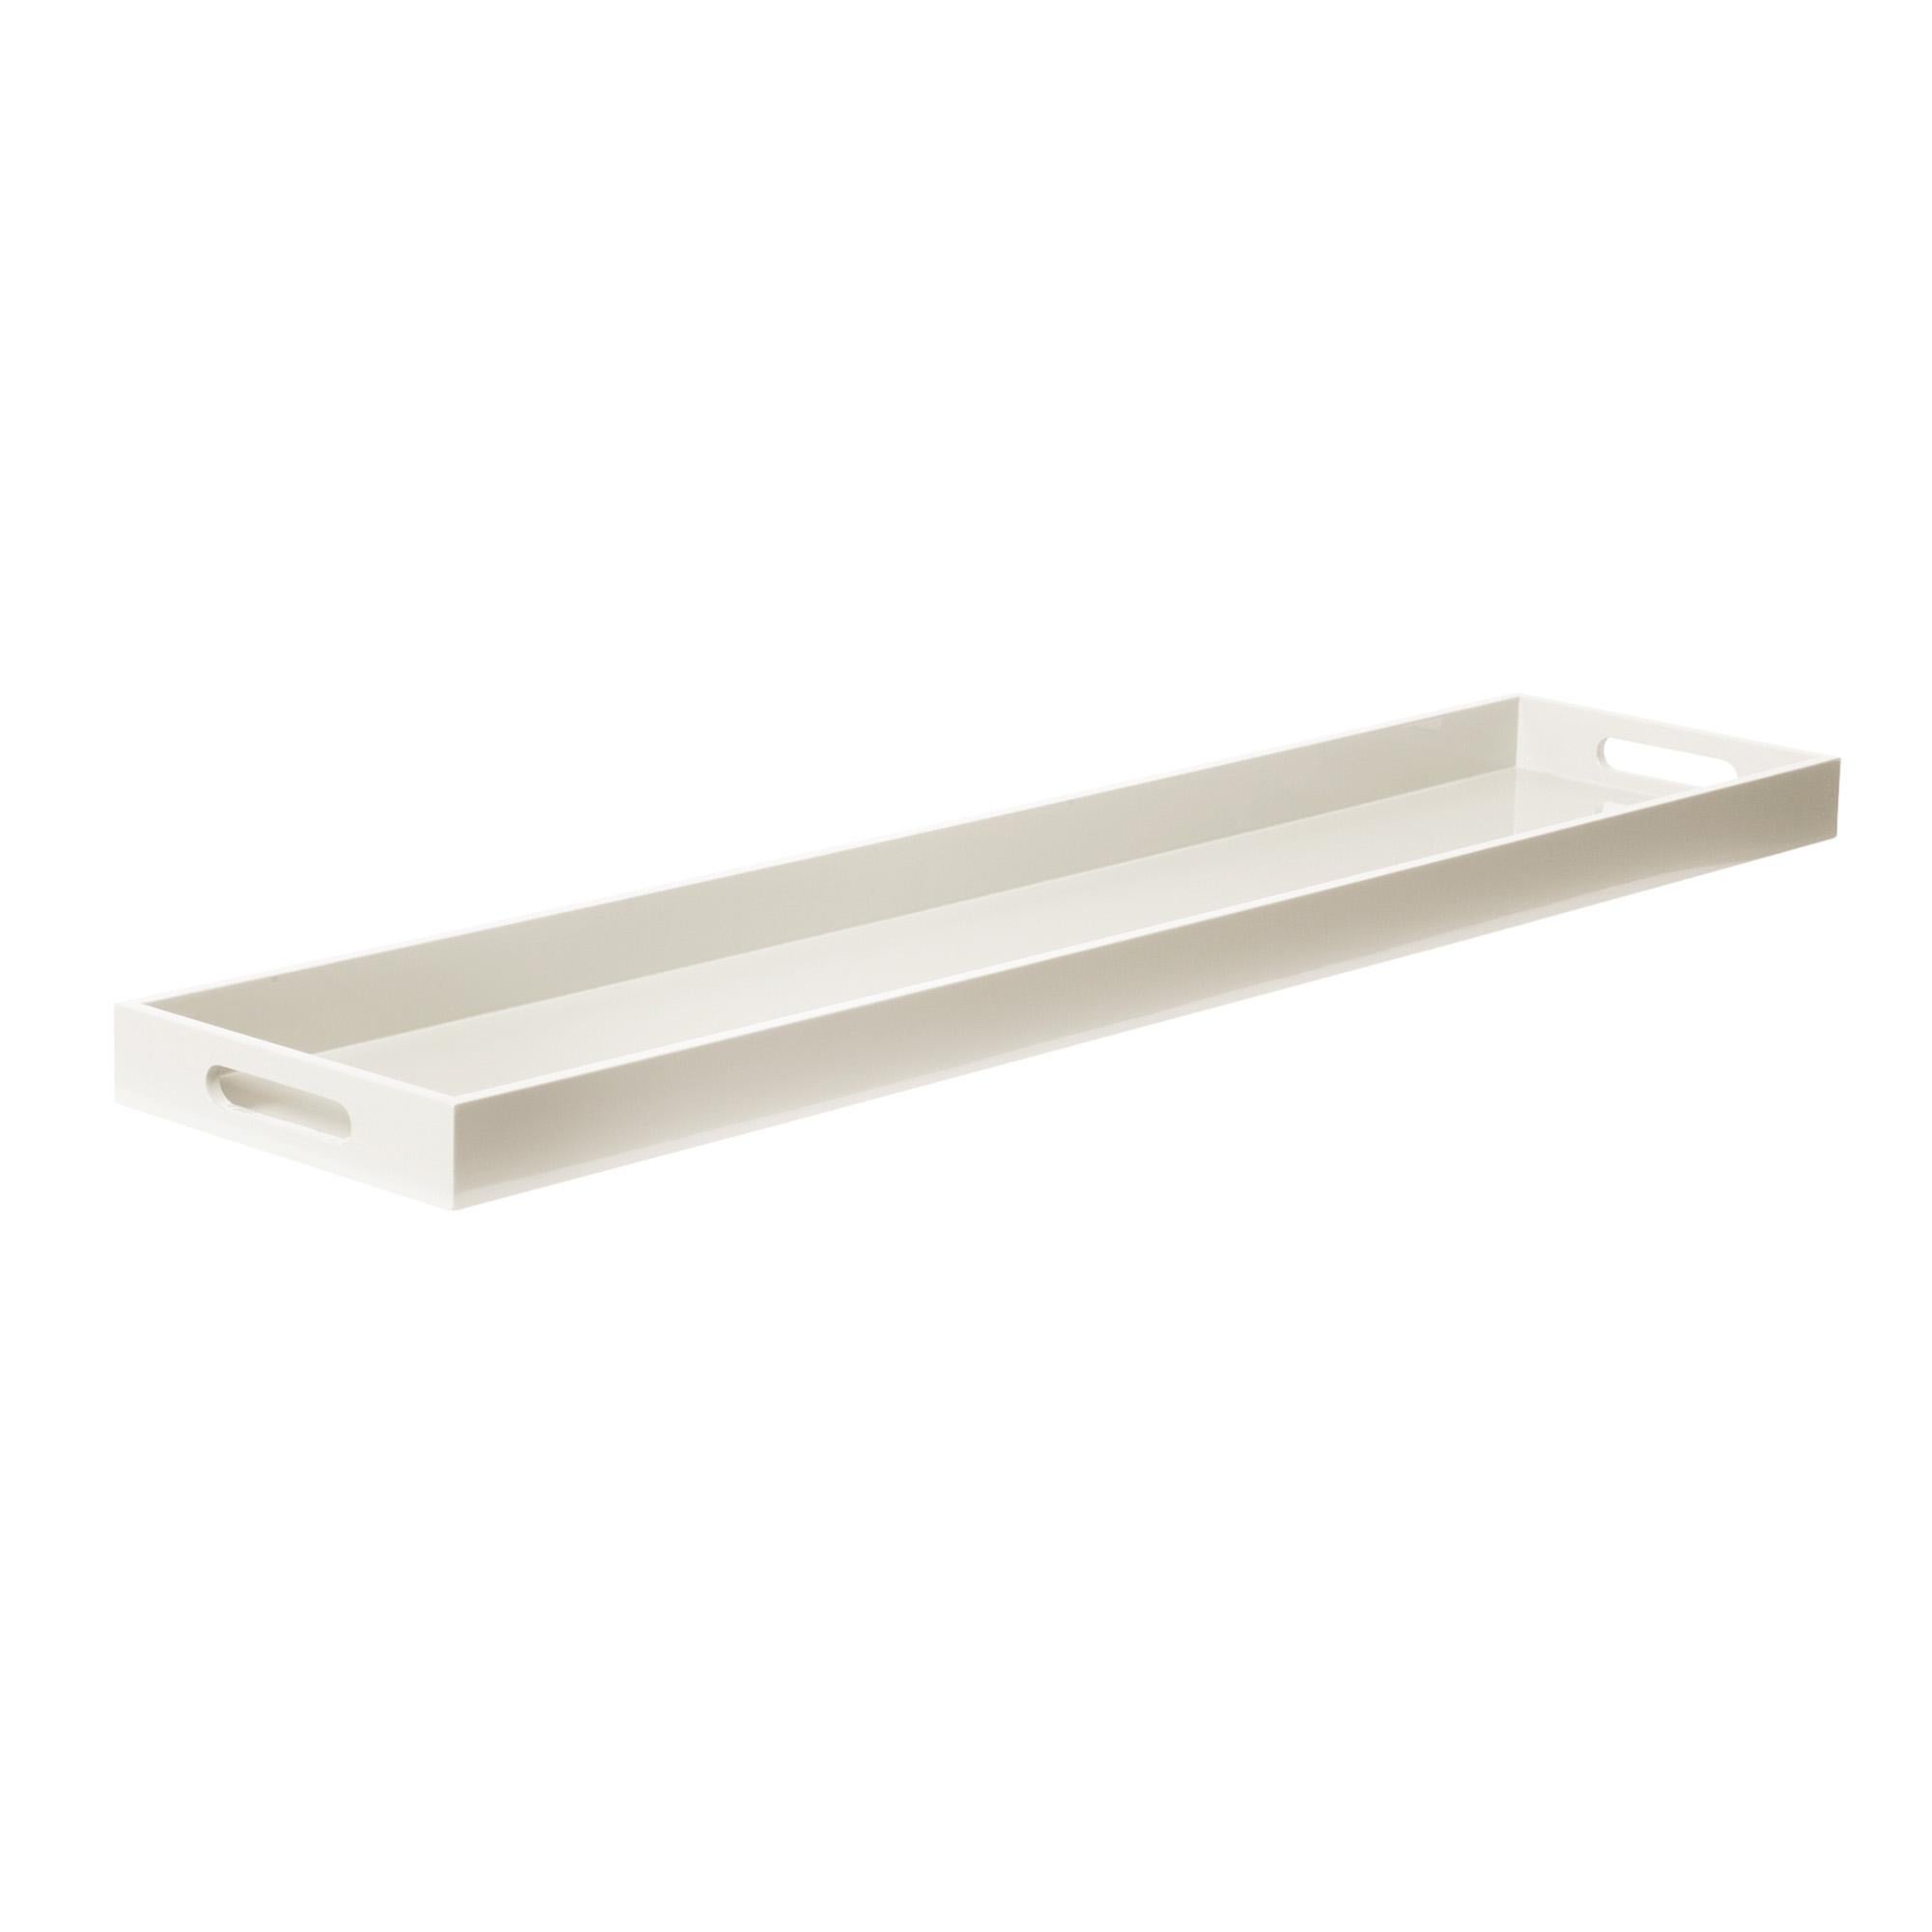 White (QR-16960.WHITE.0) Shira Extra Long Lacquered Tray by CuratedKravet